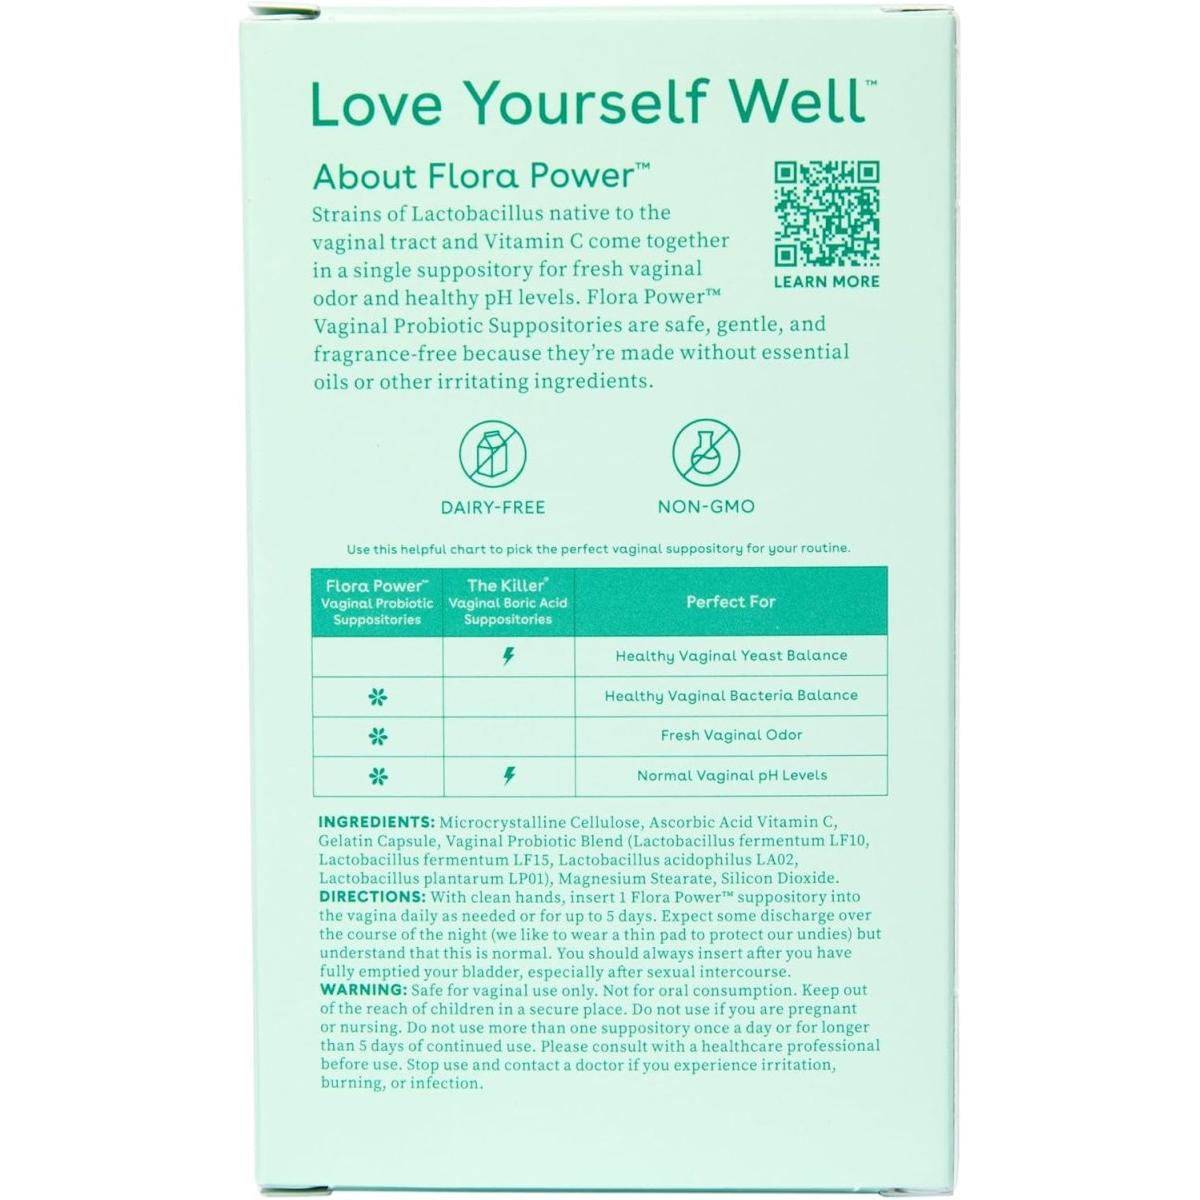 Love Wellness Flora Power Vaginal Probiotic Suppositories (10 Count) - Glam Global UK